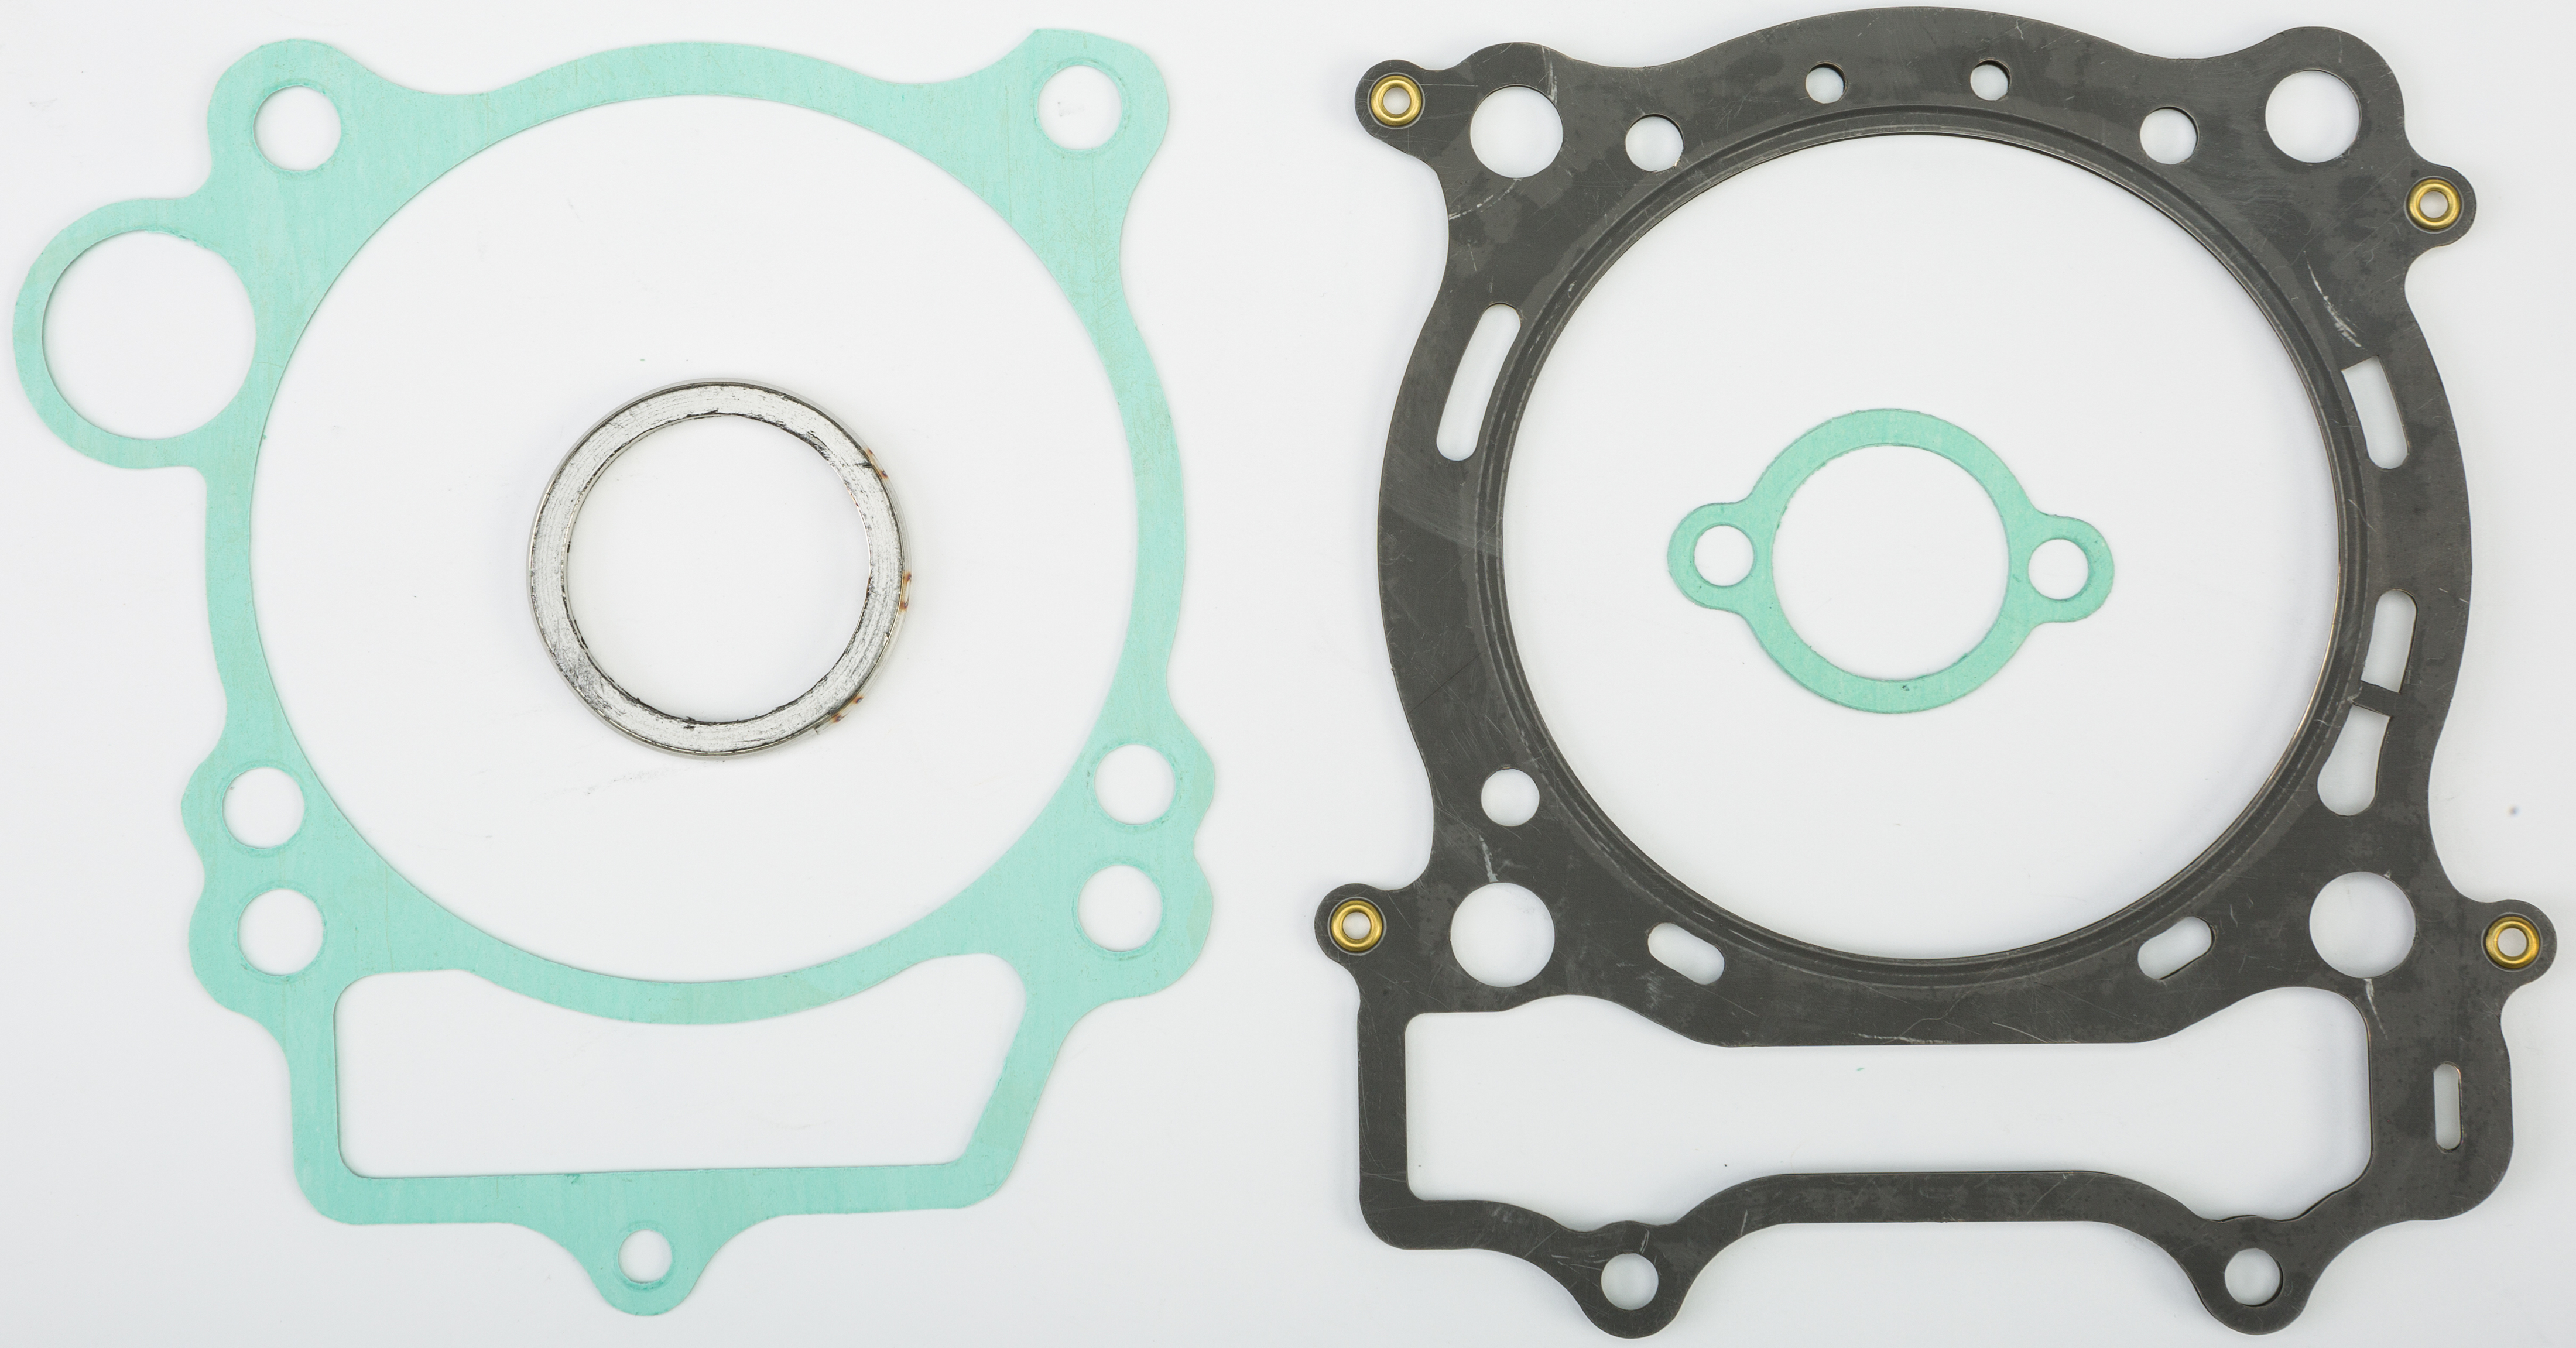 Top End Gasket Kit - 98mm - For 03-09 Yamaha WR450F YFZ450 YZ450F - Click Image to Close